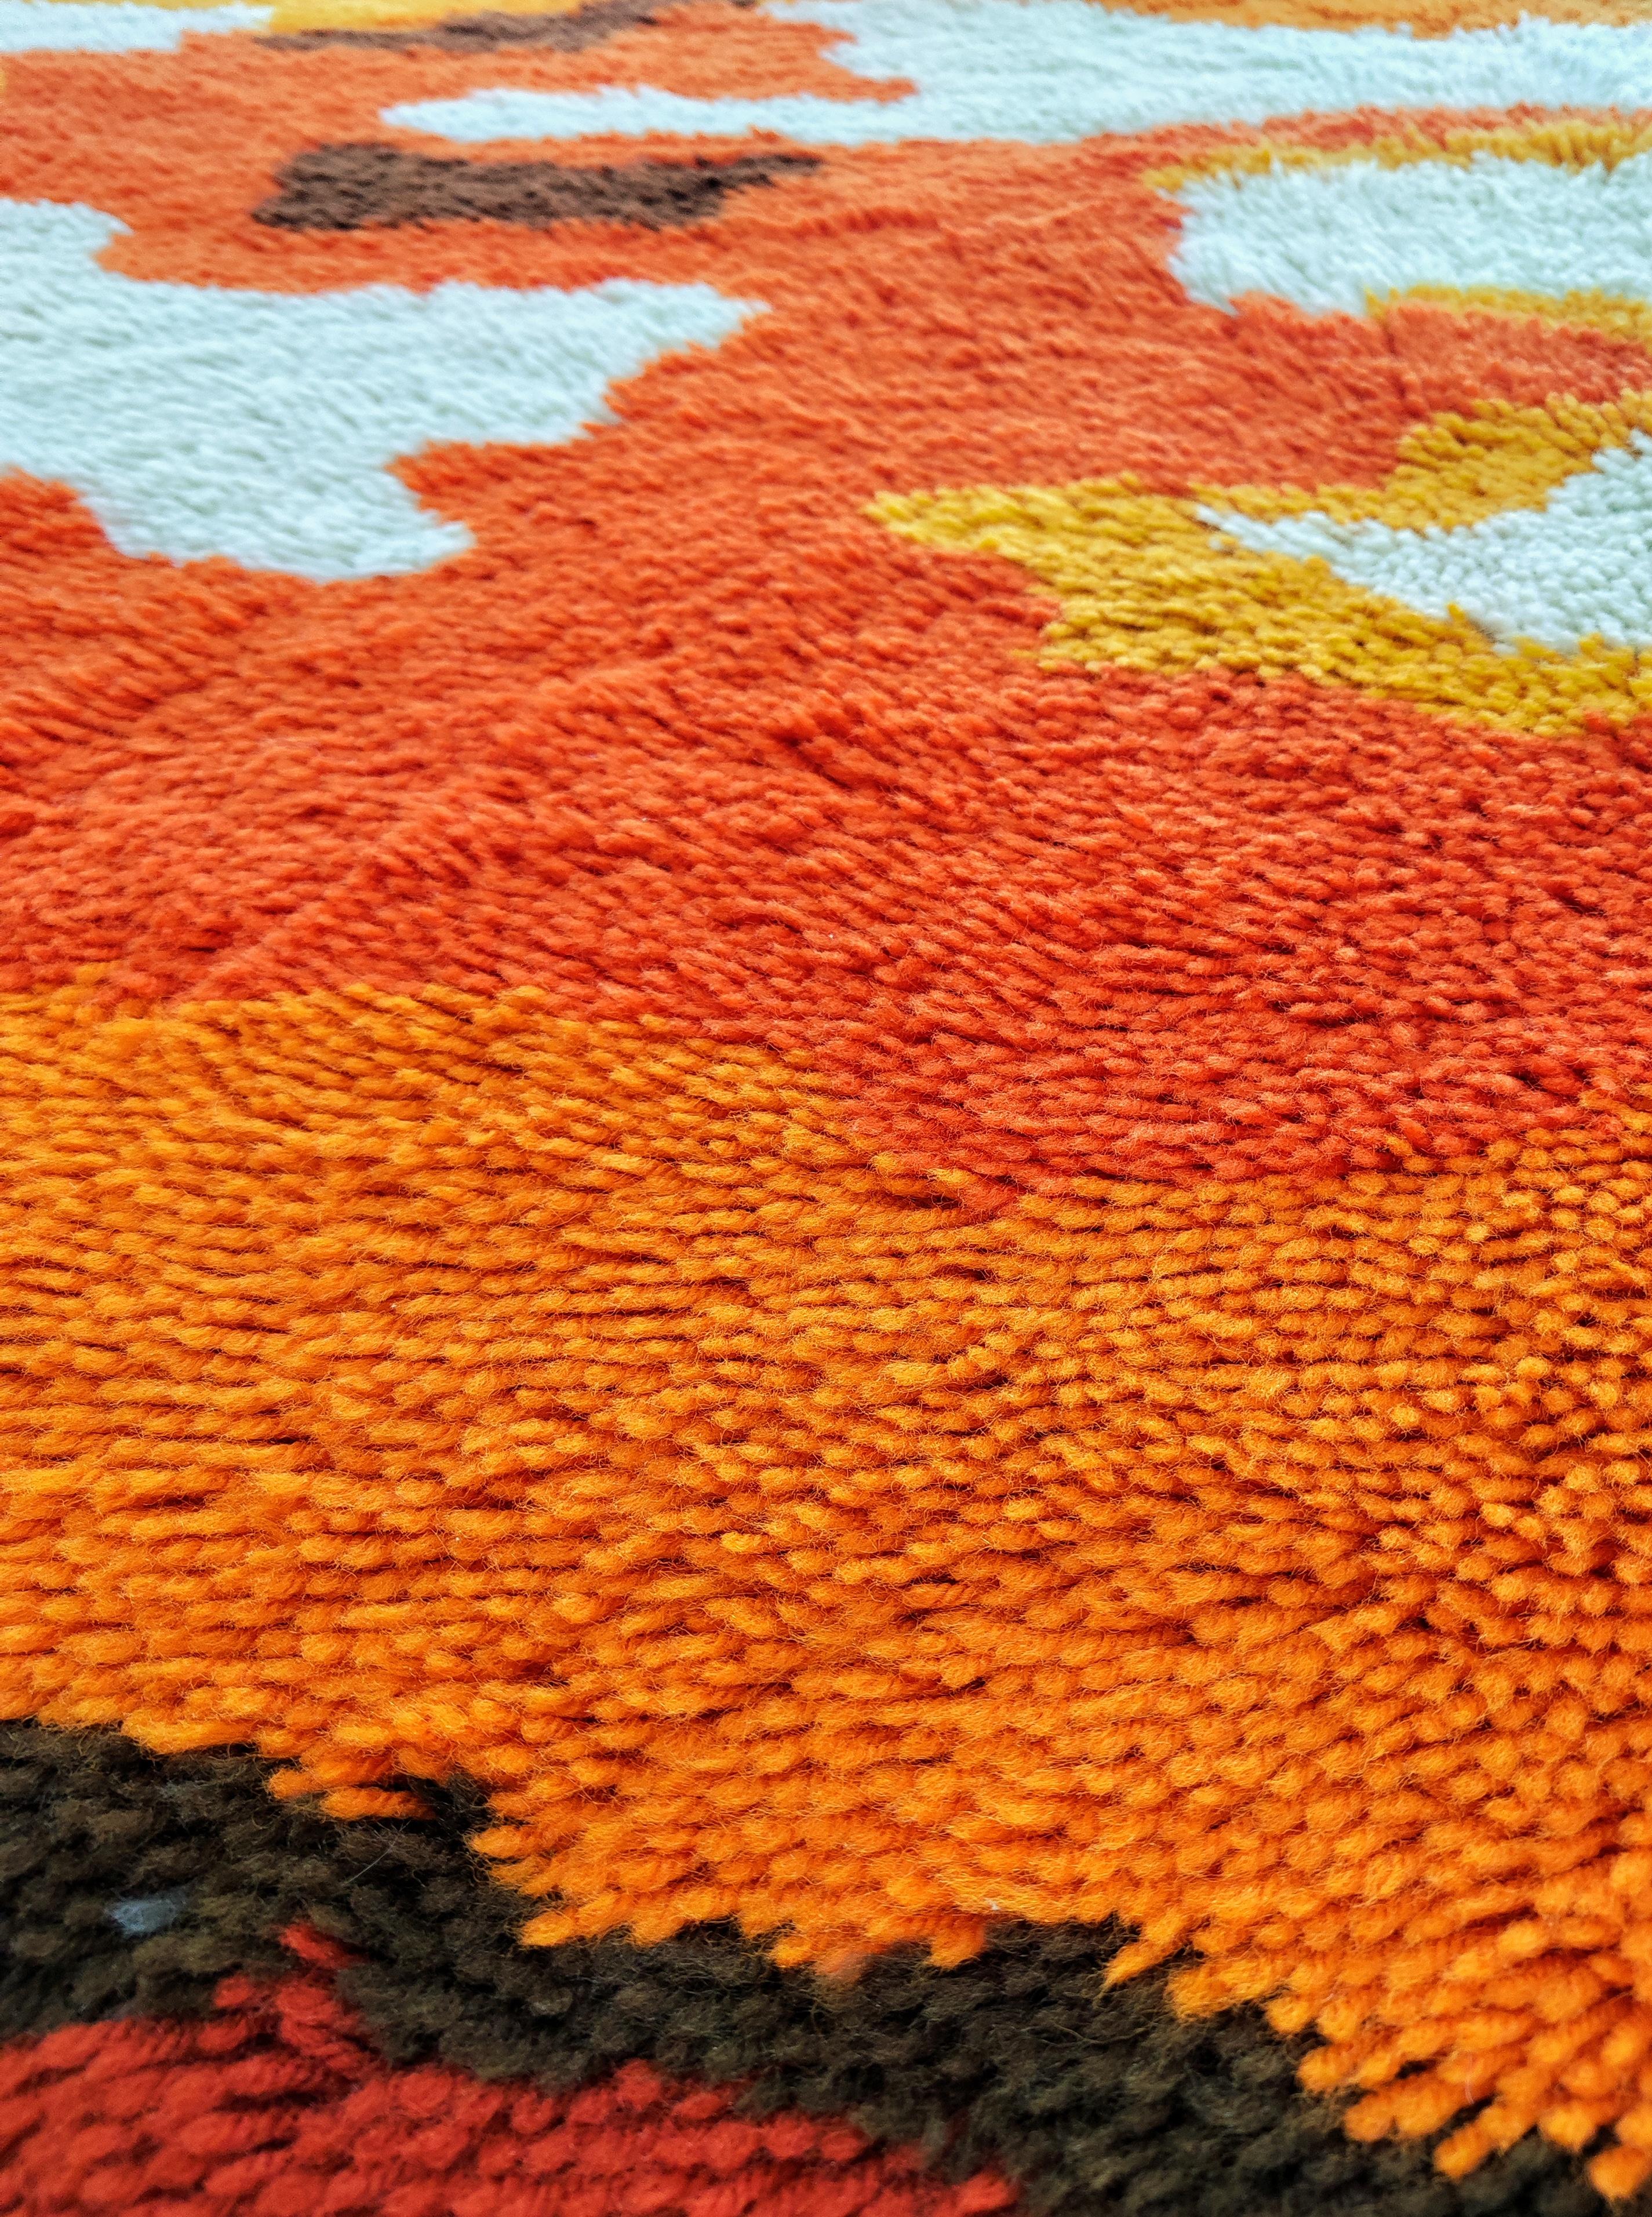 Woven Mid Century Scandinavian Rya Rug in Orange, Yellow, Red and White, Sweden 1970s For Sale